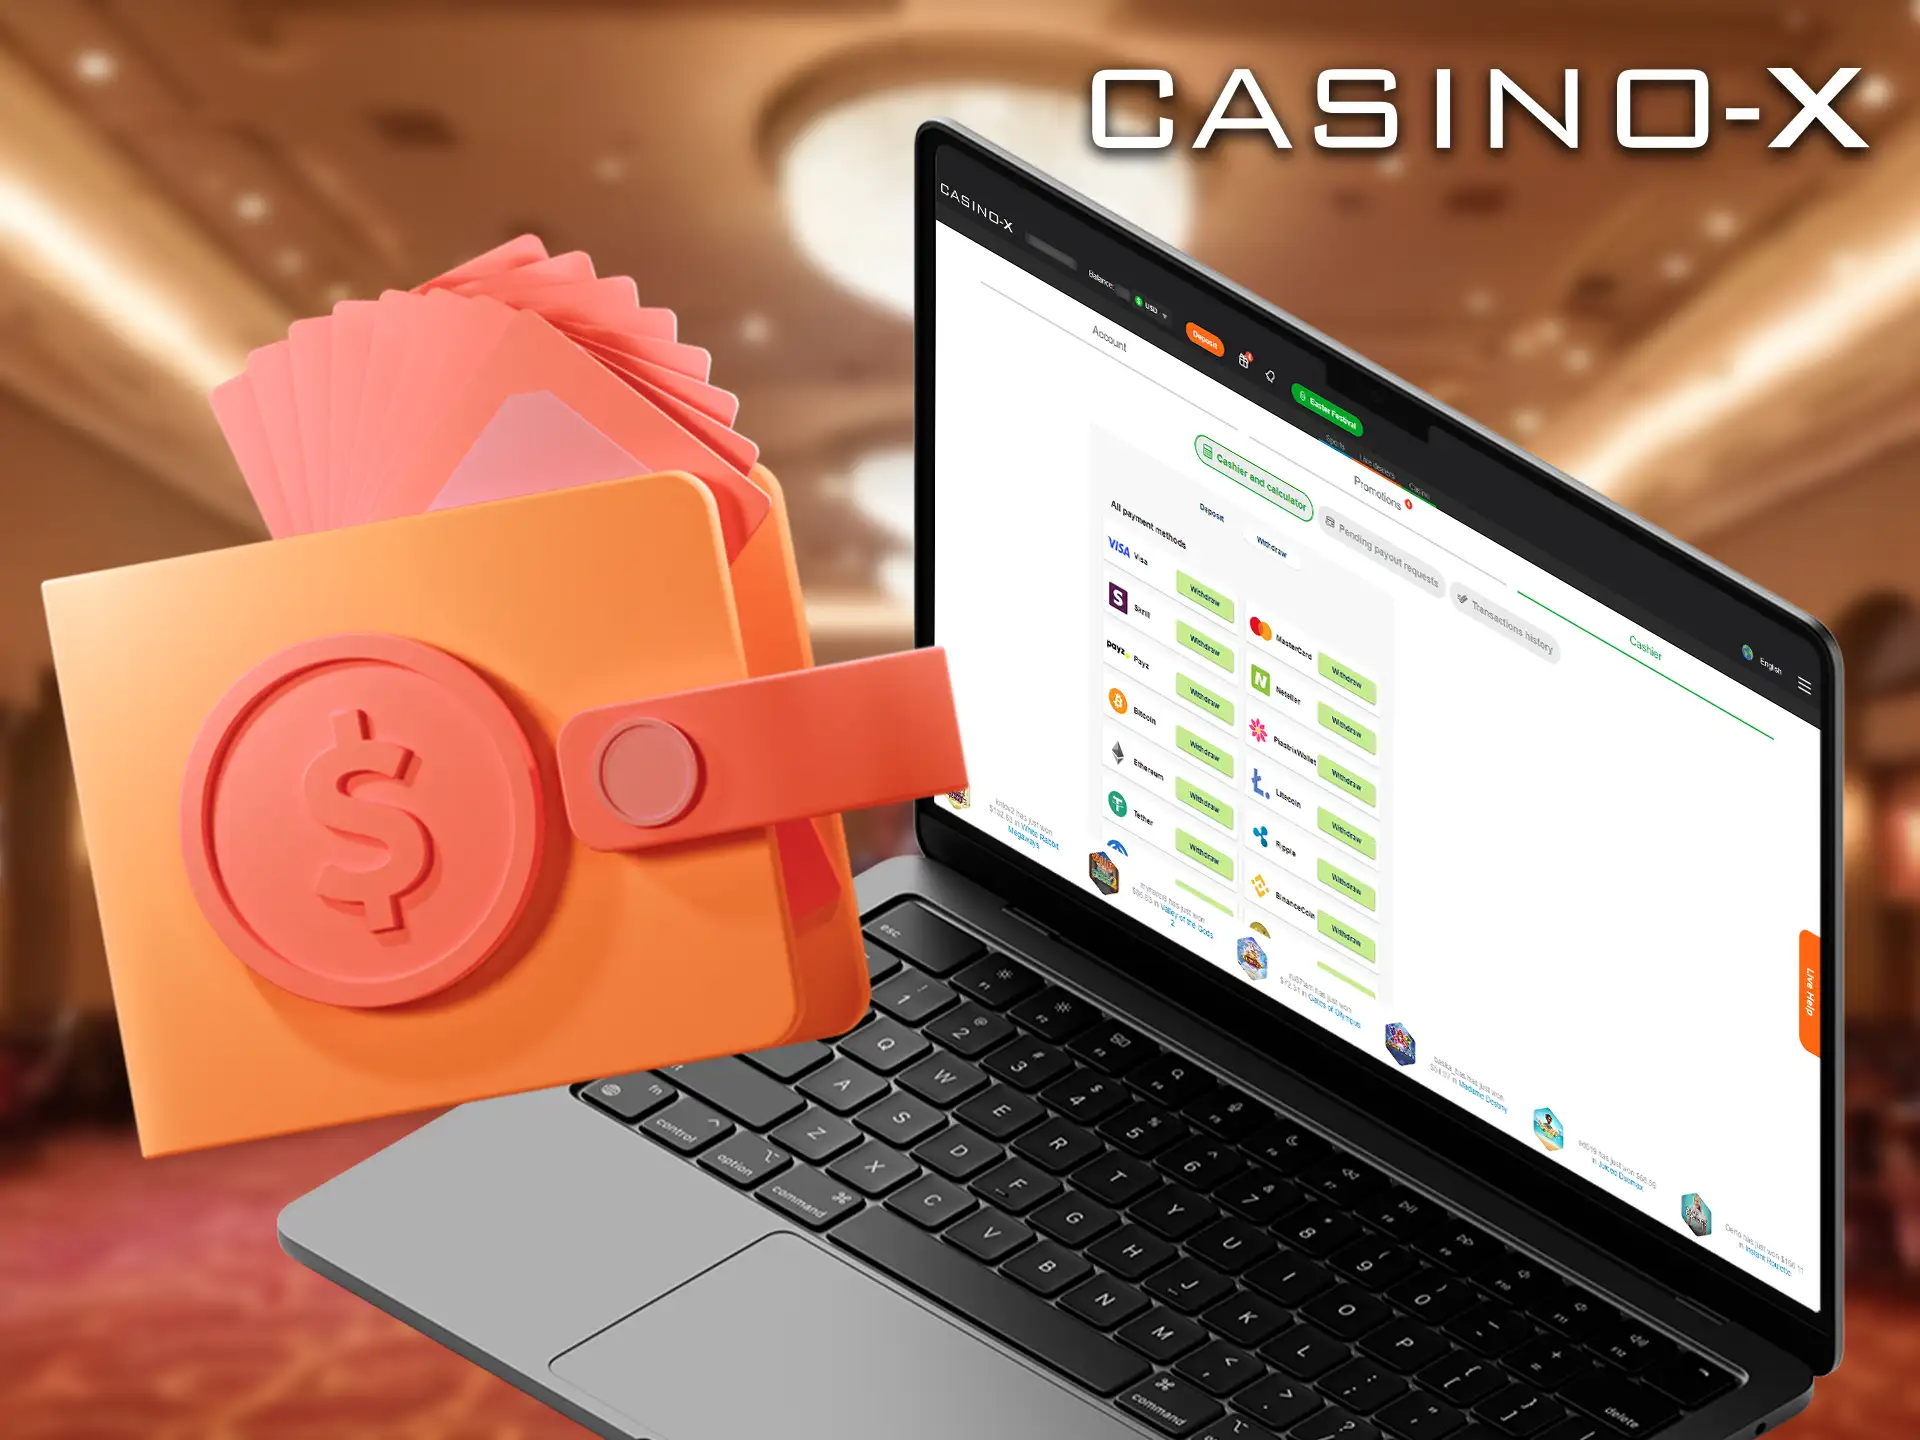 Casino-X offers fast withdrawal processing, so you can get your winnings back to you quickly.